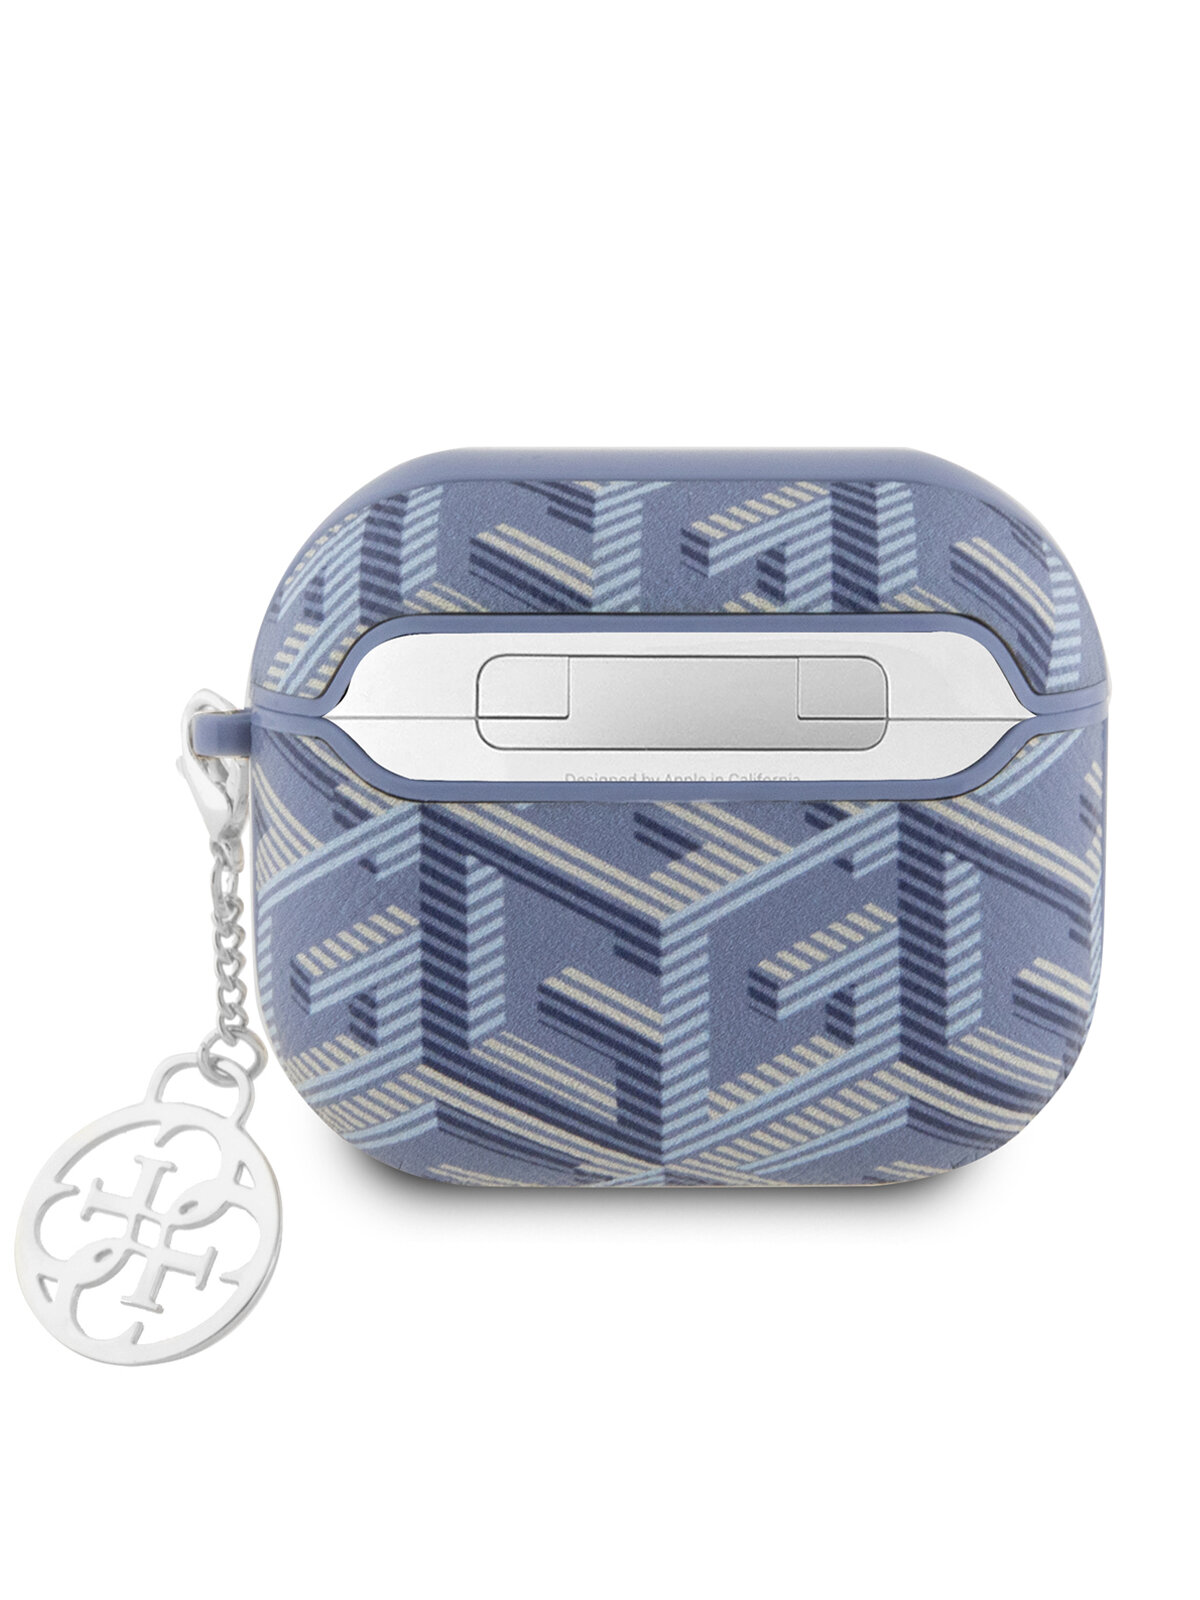 Guess для Airpods 3 чехол PU leather G CUBE with metal logo and Charm Blue